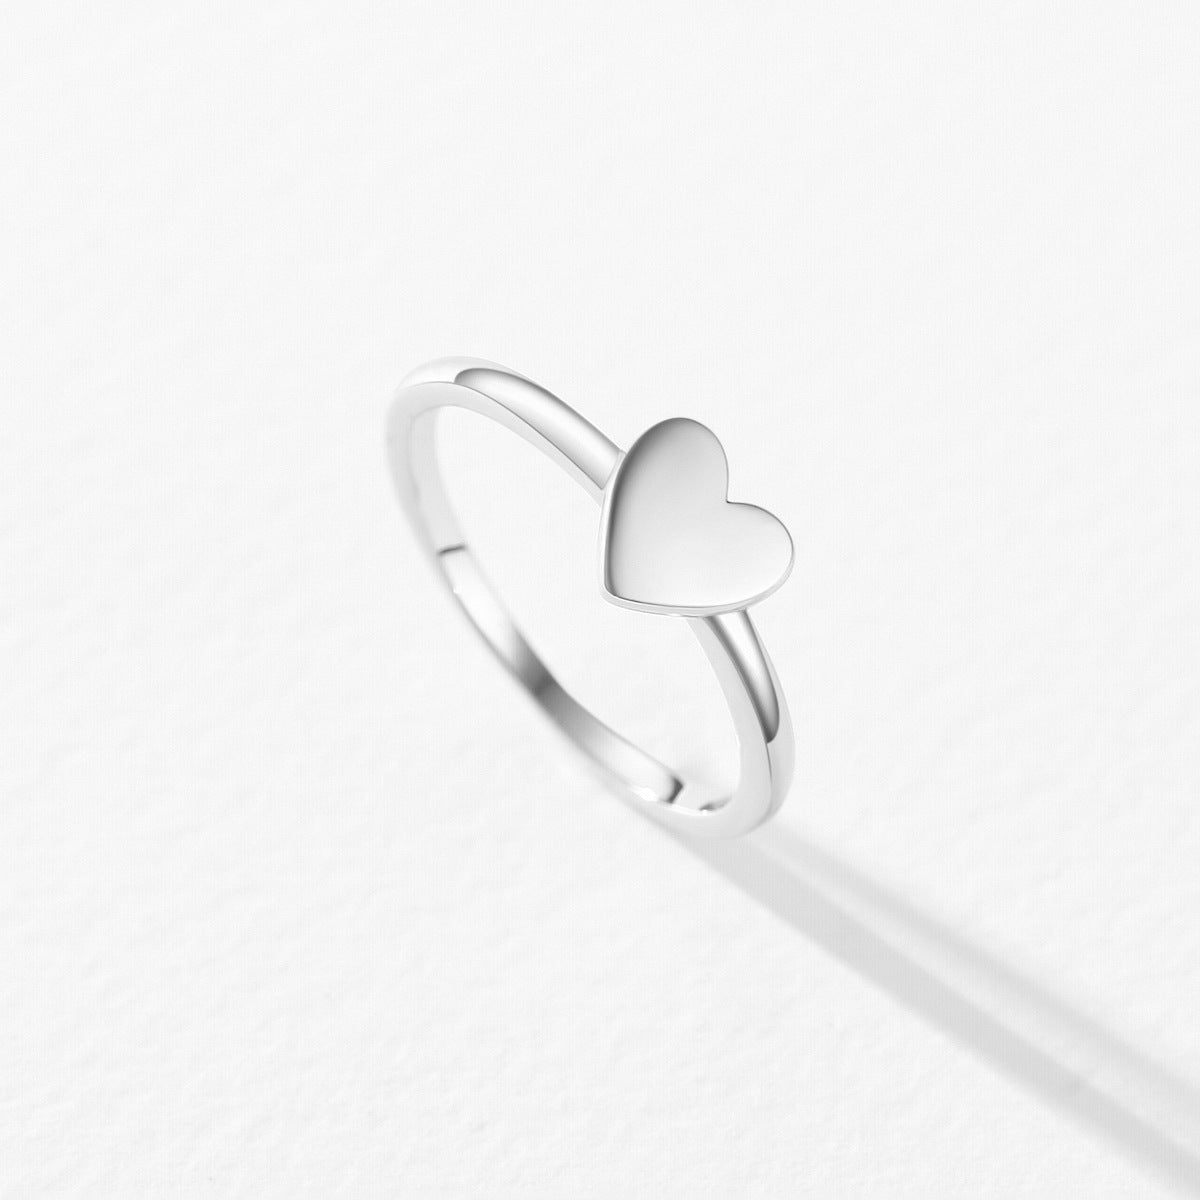 S925 Sterling Silver Zircon Love Ring - Versatile, Simple, and Sweet